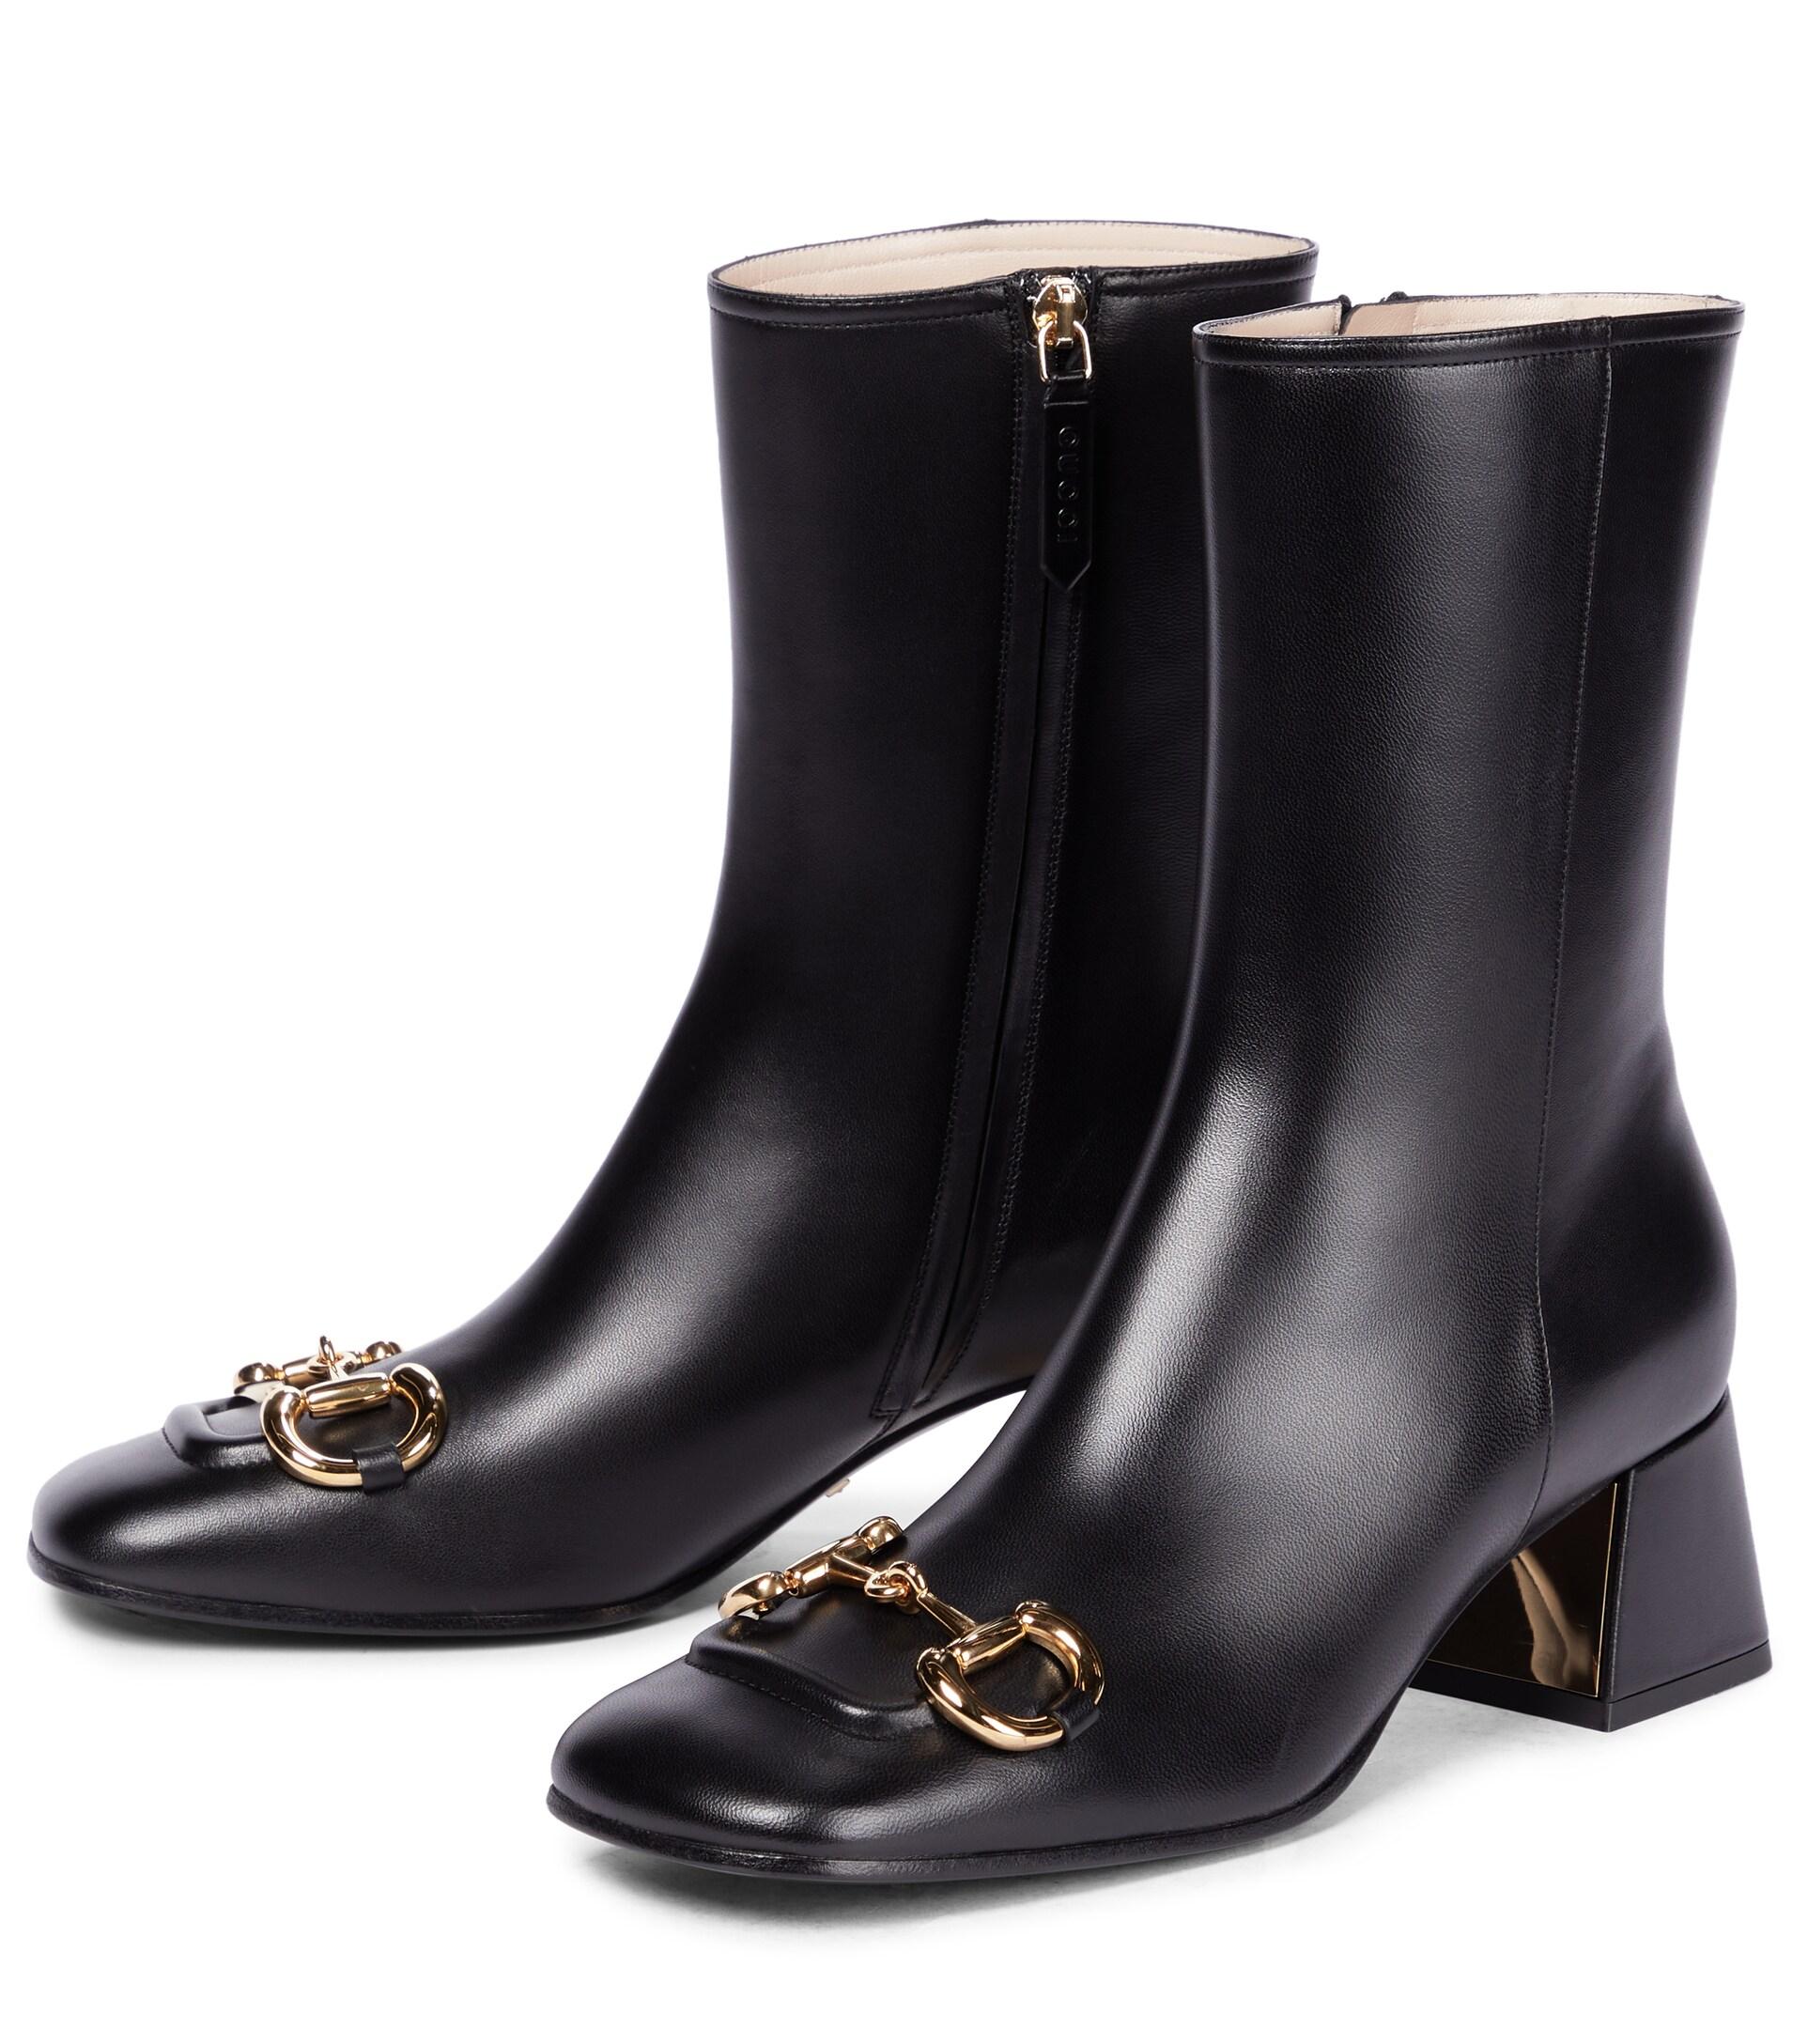 Gucci Horsebit Leather Ankle Boots in Black | Lyst